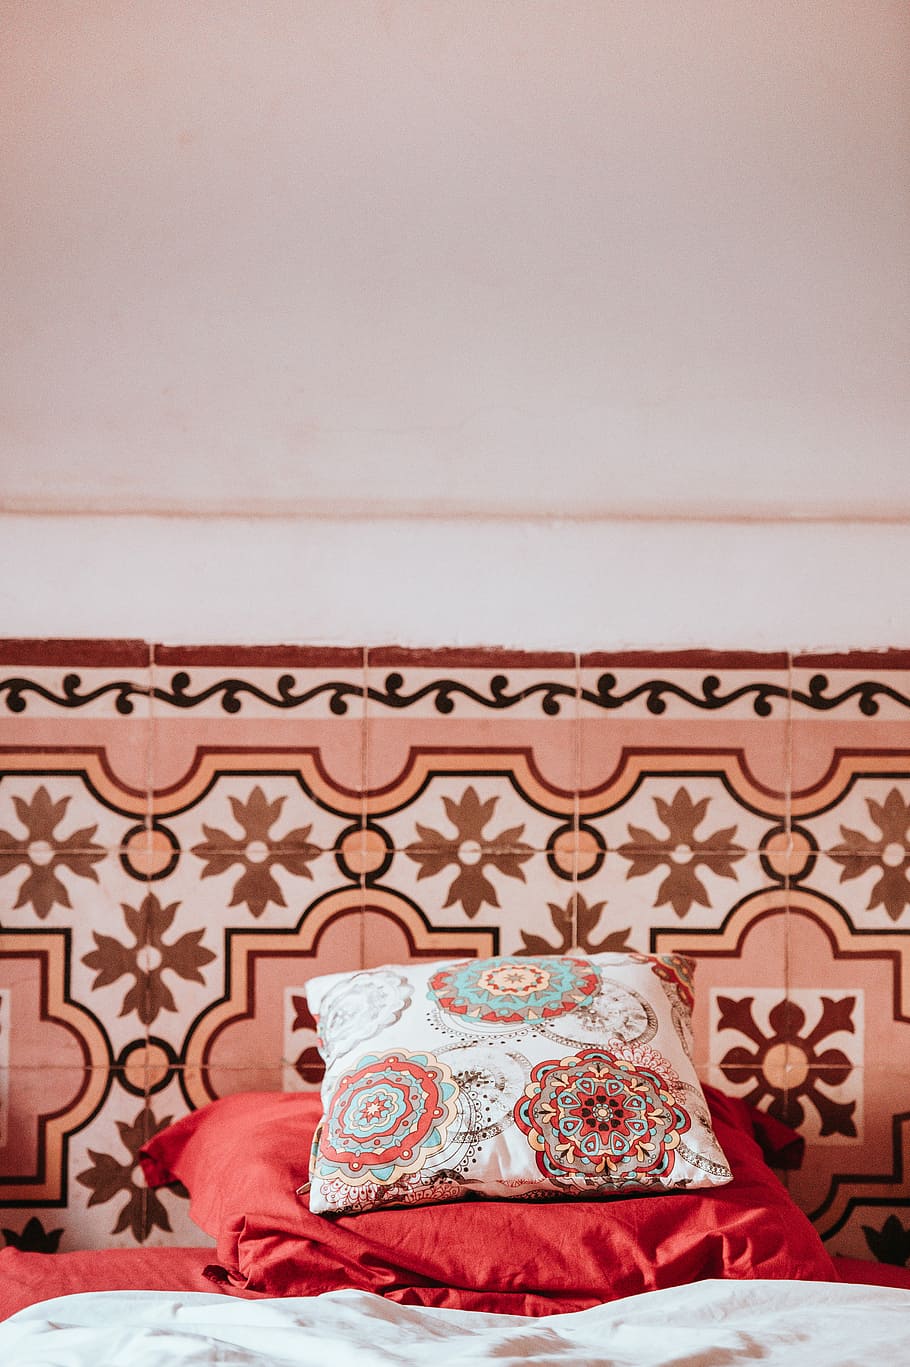 Marrakesh, Morocco bedroom, white, red, and teal pillow on top of red cloth, HD wallpaper